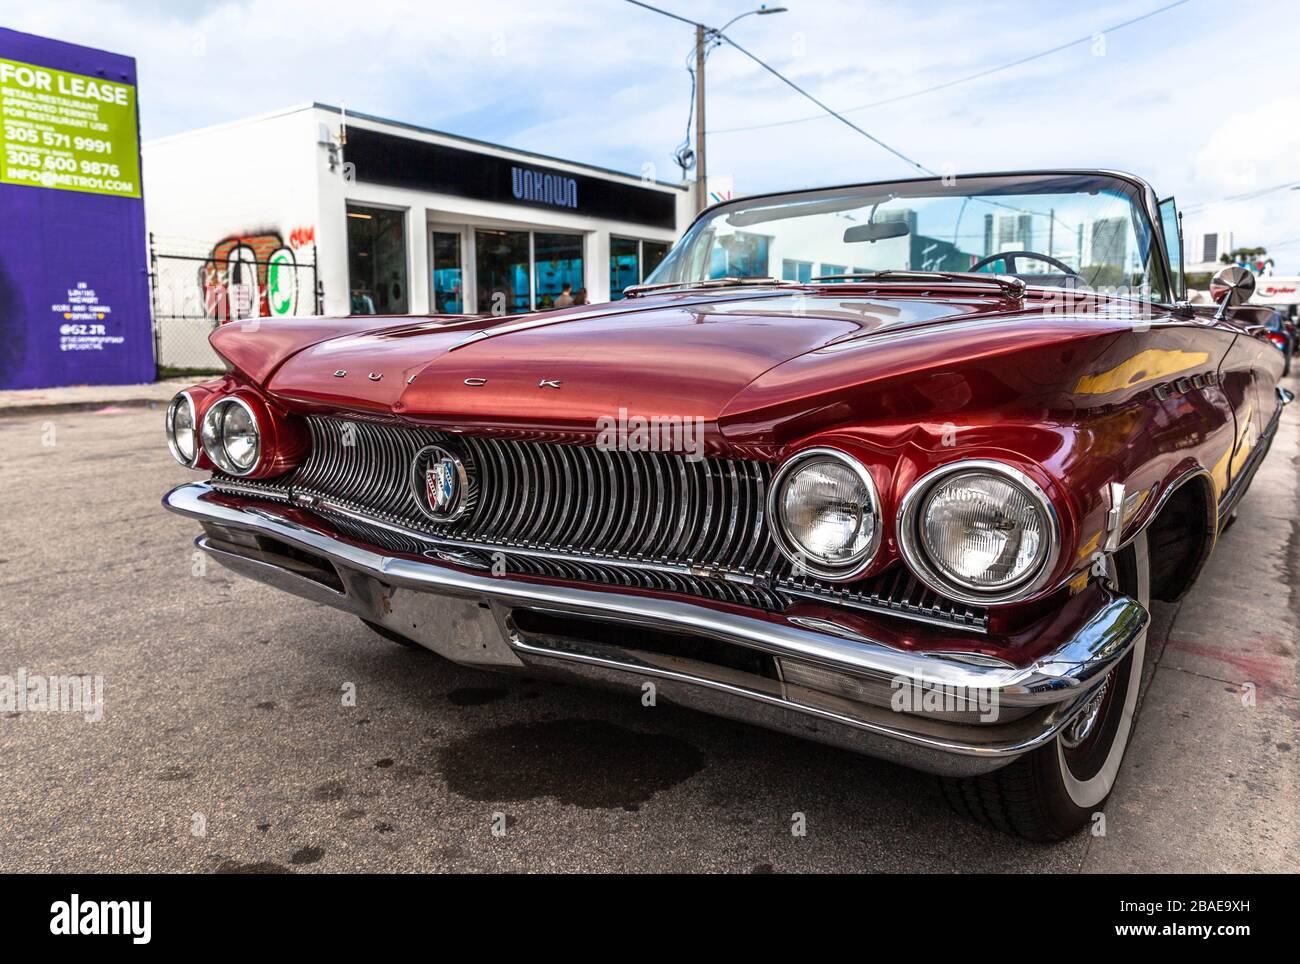 A three quarter front view of a Buick convertible car parked on a side of a road, Wynwood neighborhood, Miami Florida, USA. Stock Photo